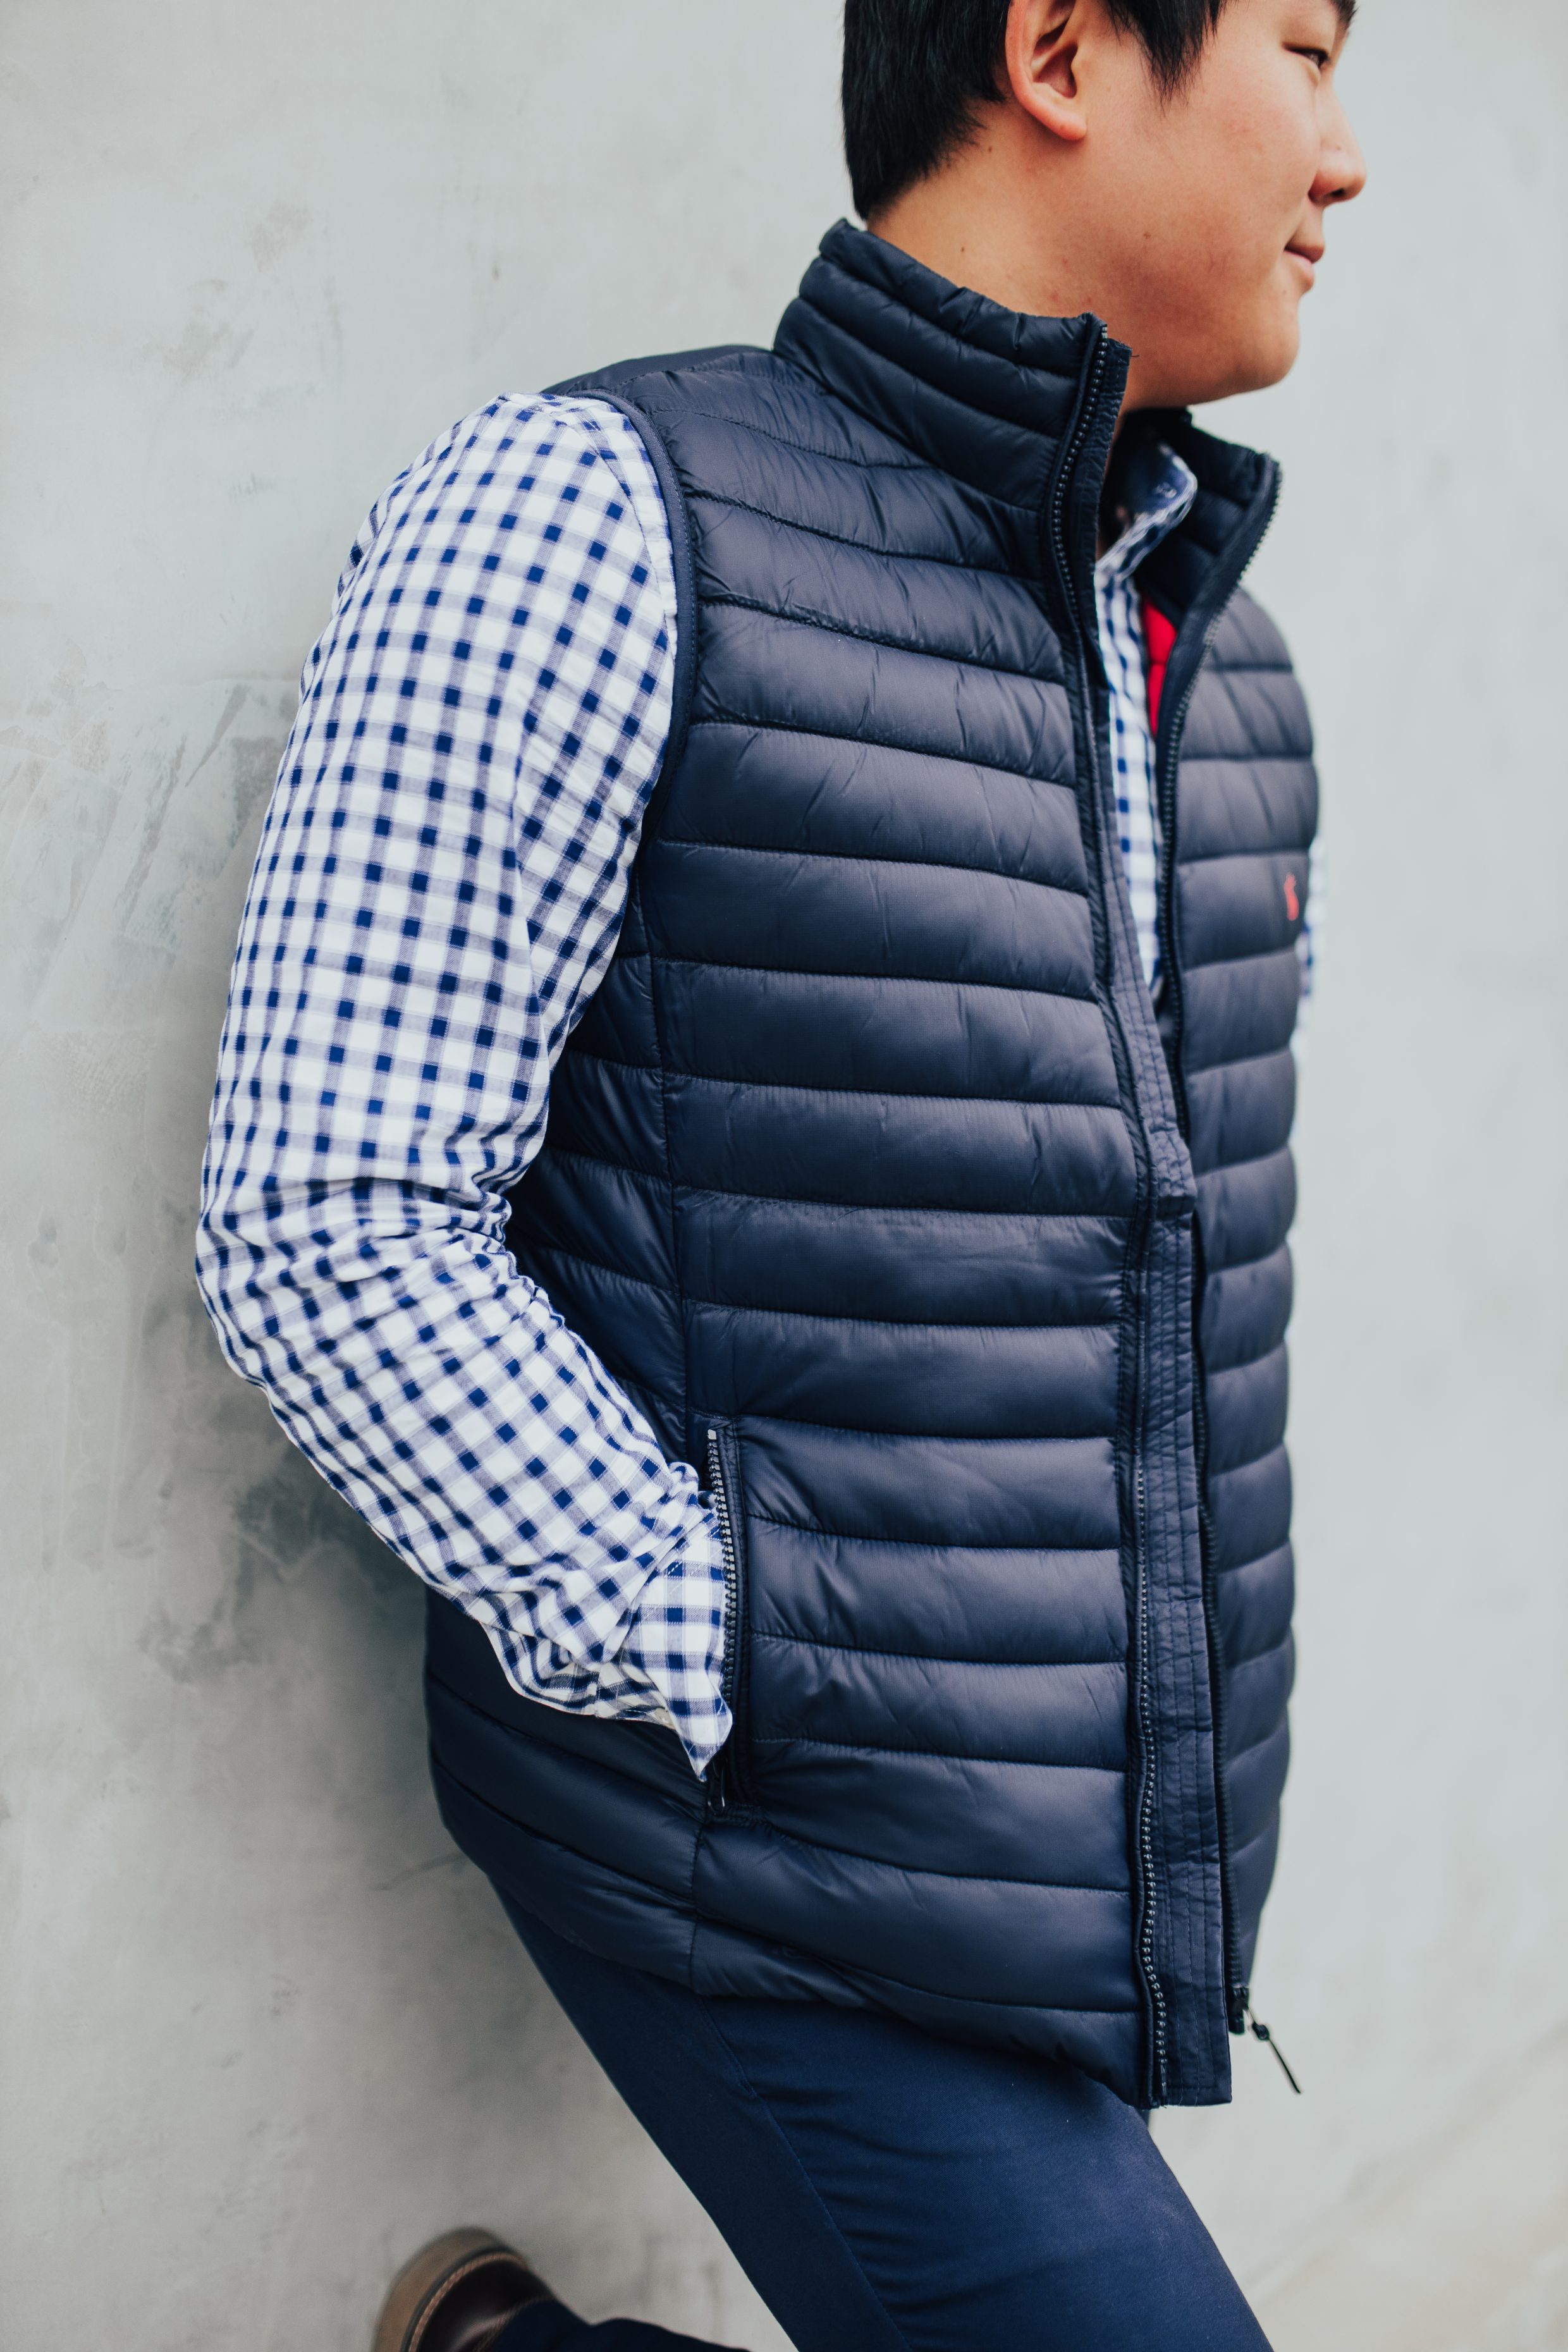 Joules Navy Puffer Vest with Check Shirt and Navy Trousers